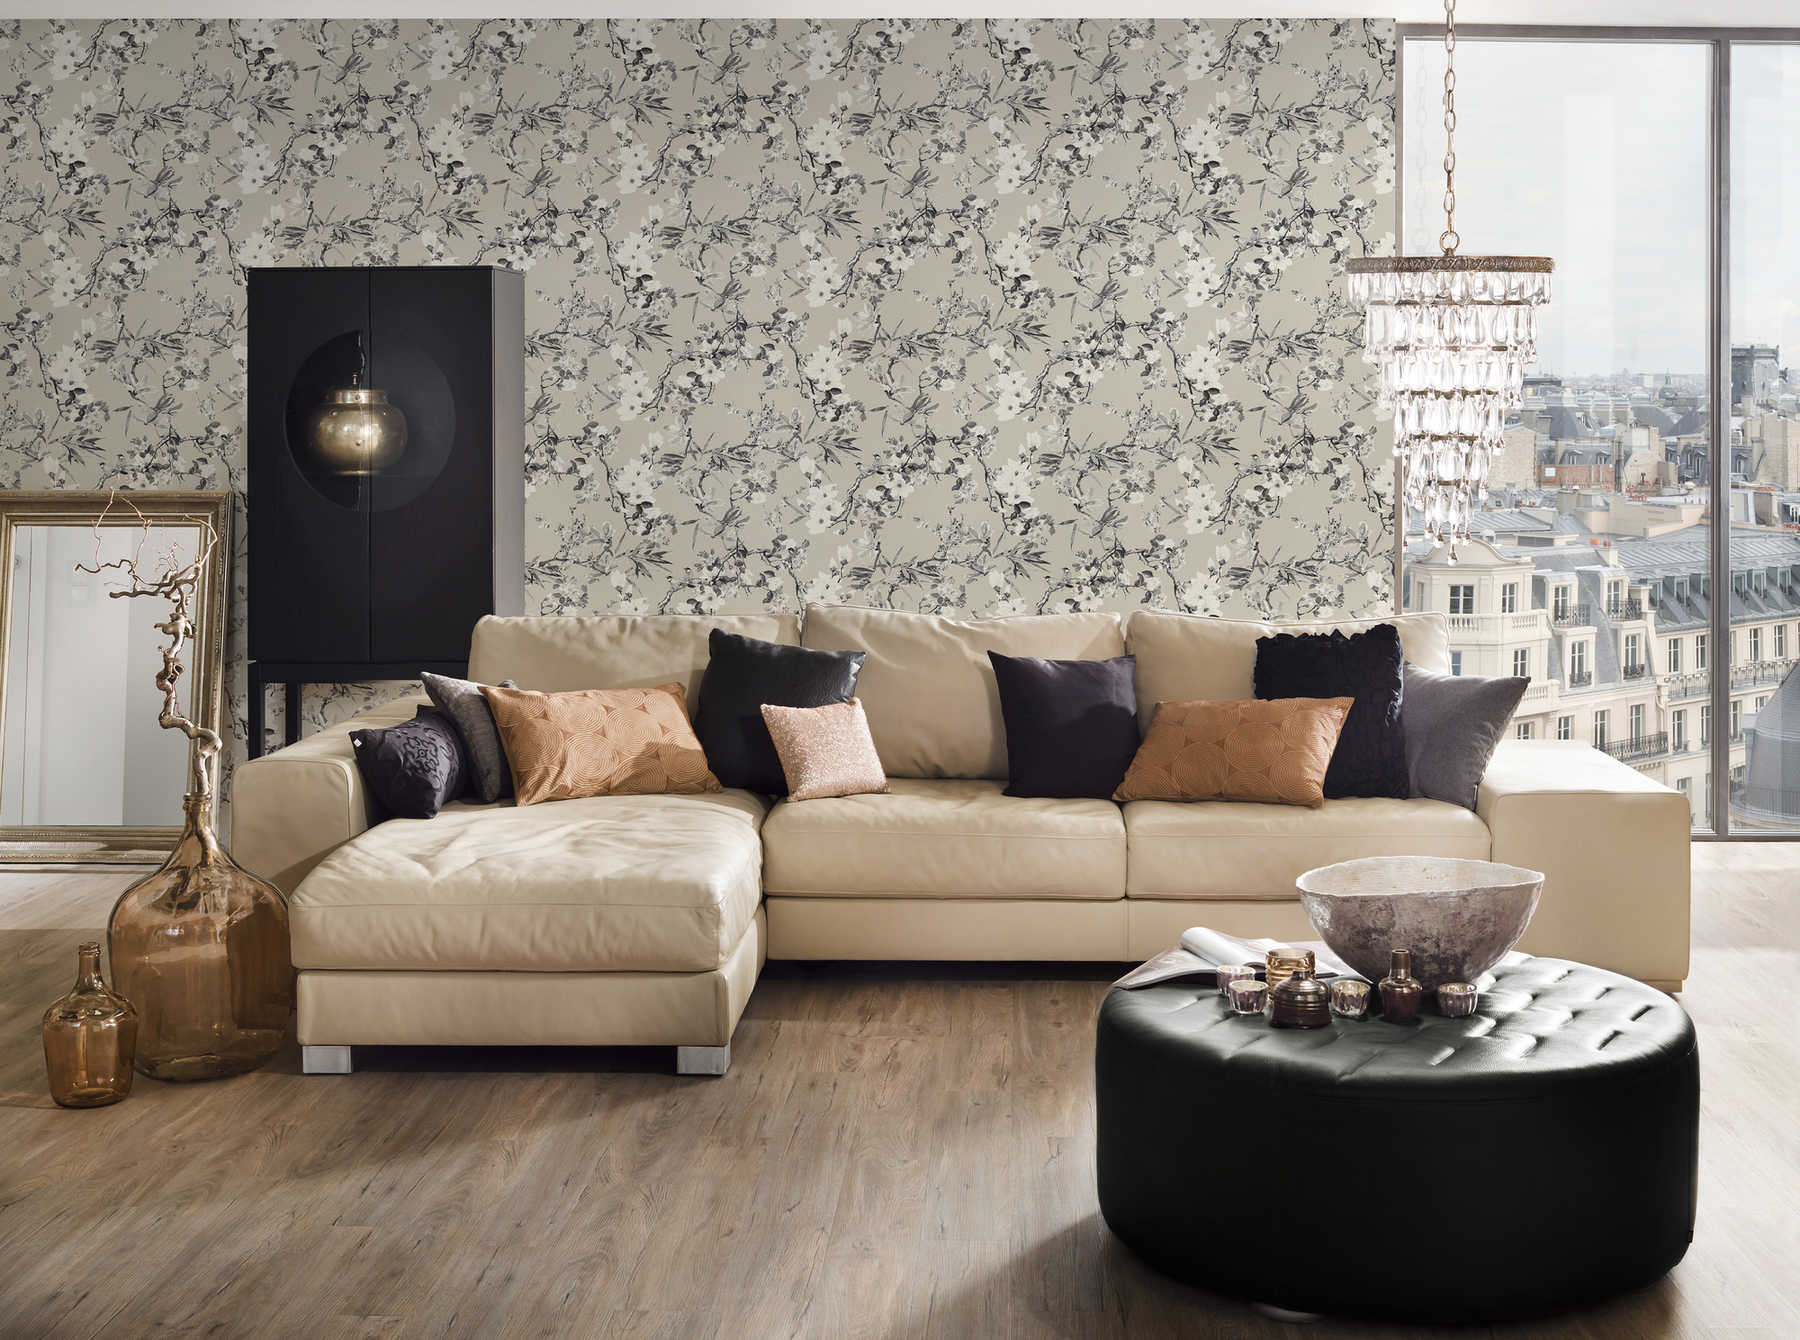             MICHALSKY floral wallpaper in neutral colours - beige, grey
        